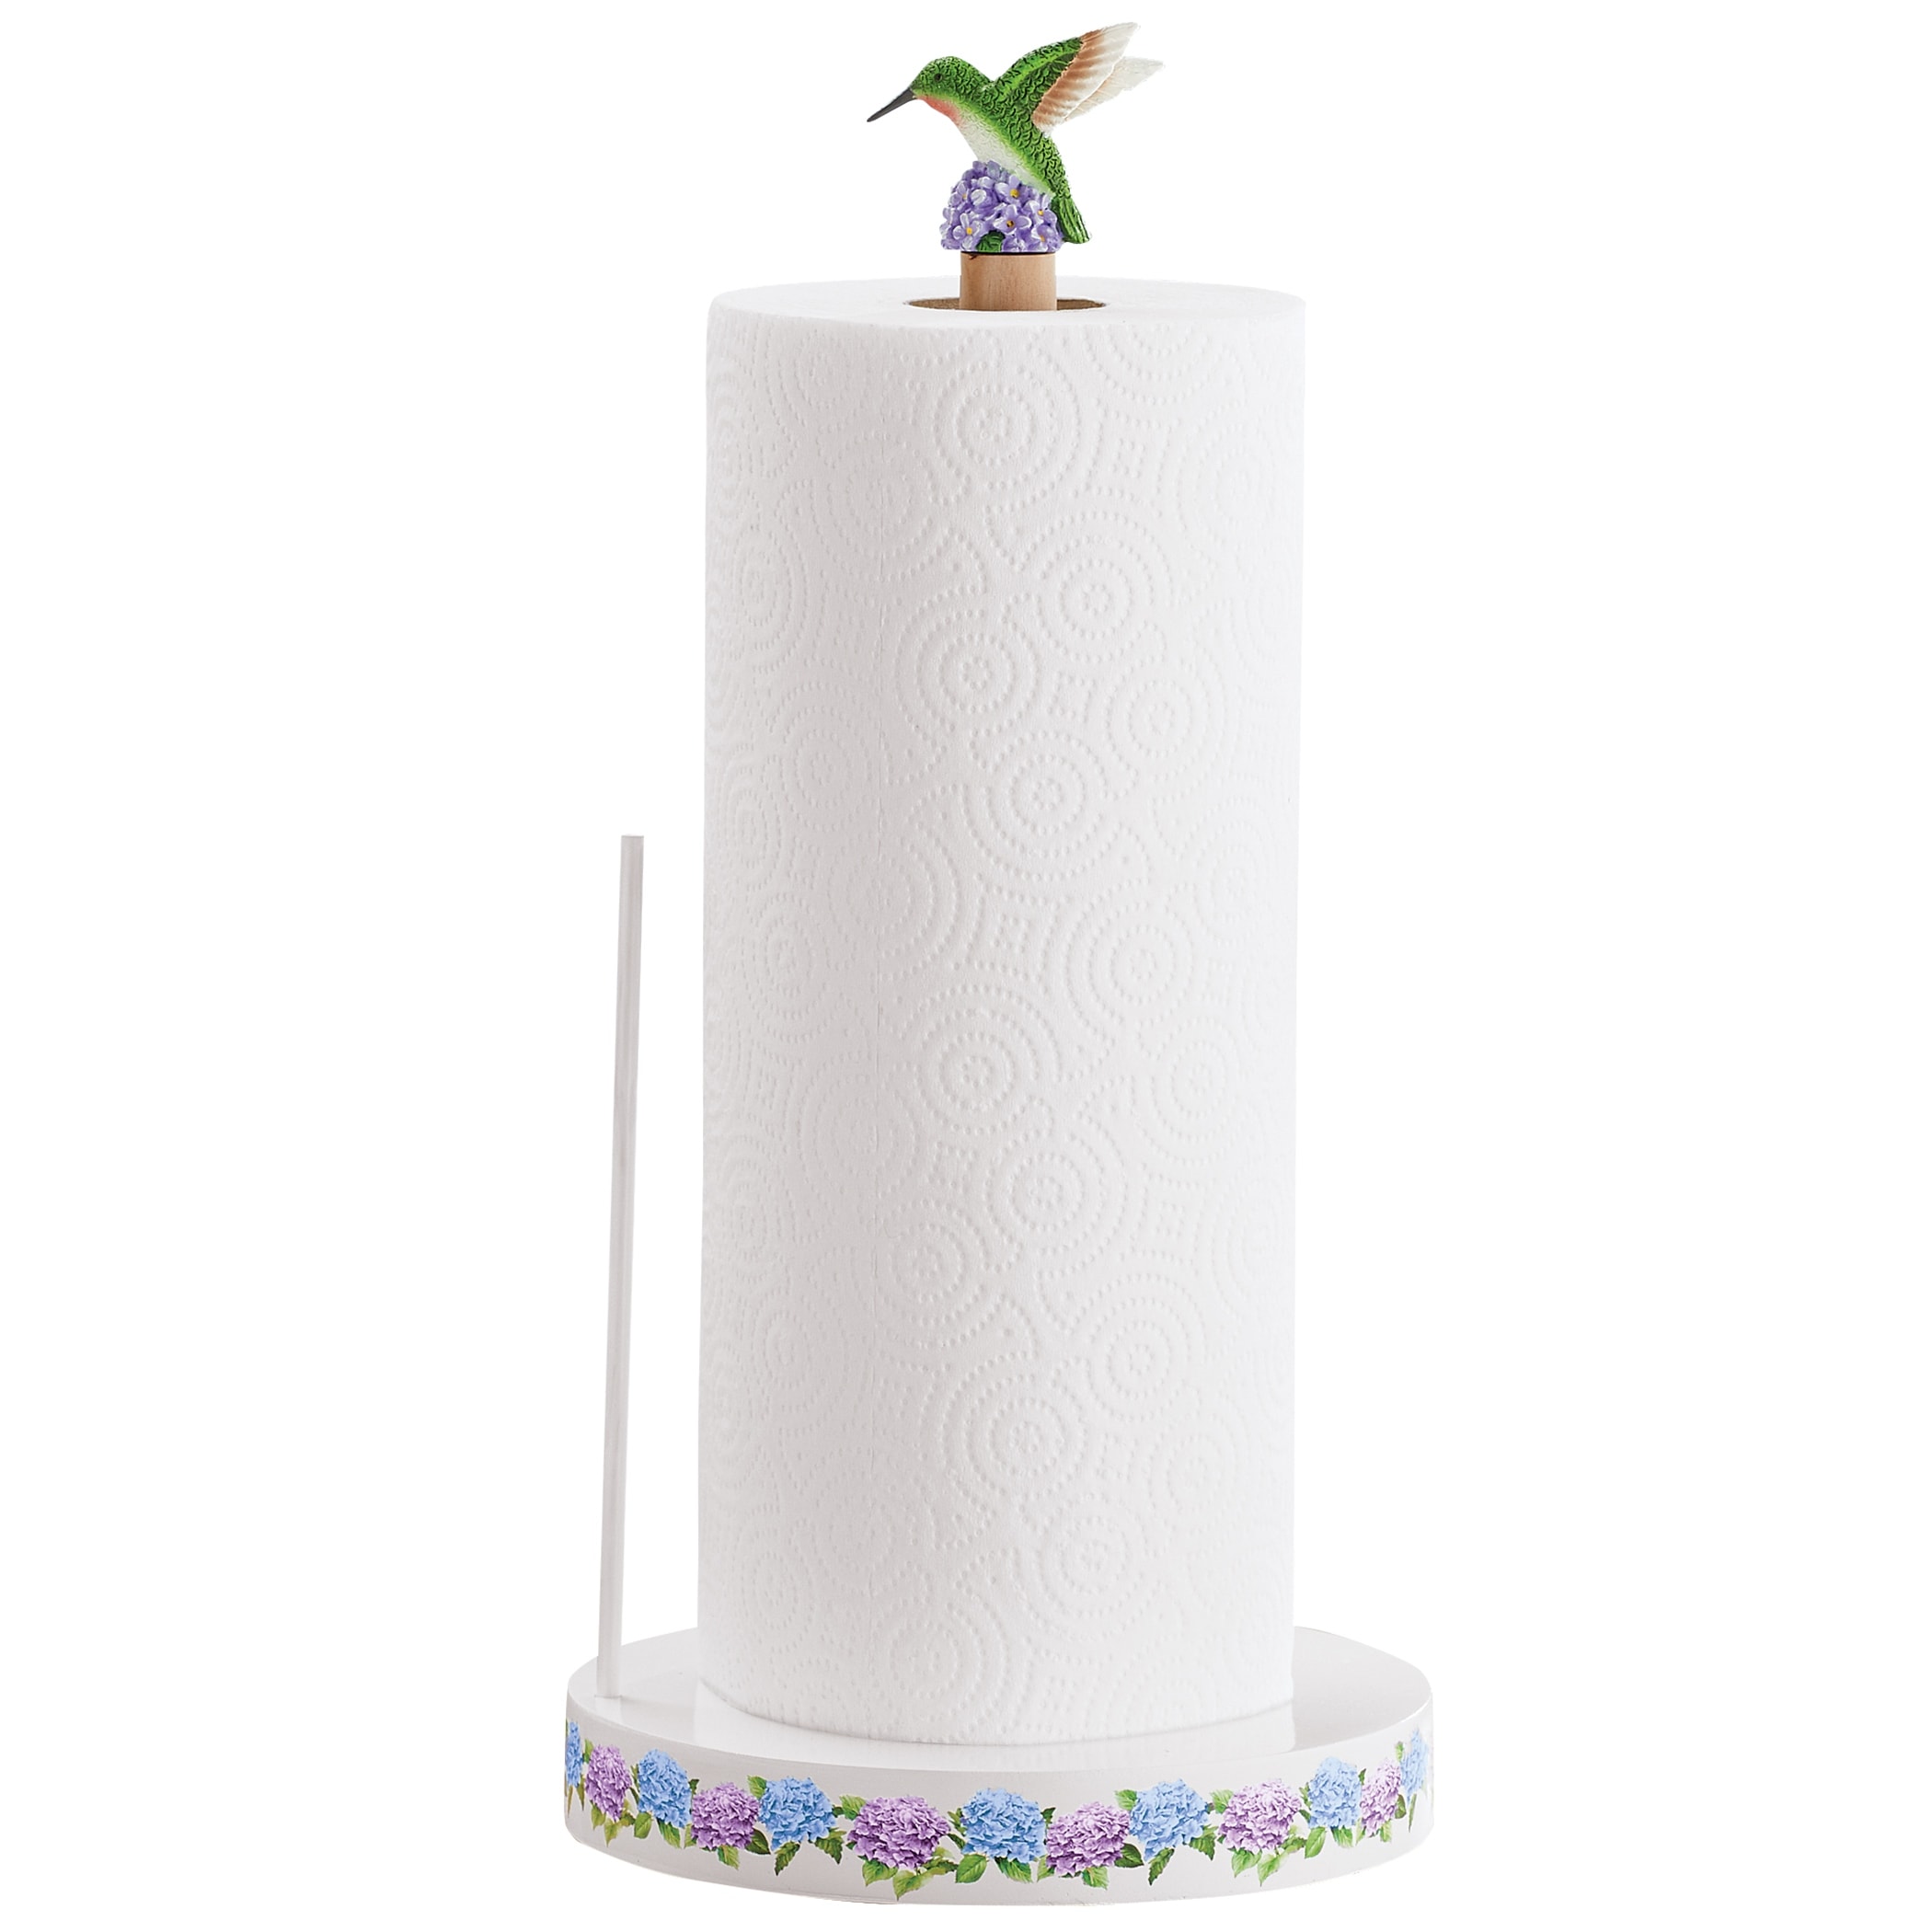 https://ak1.ostkcdn.com/images/products/is/images/direct/693d03aac401ede0c120ca00a93d1f1cb39208a8/Hummingbirds-and-Hydrangeas-Hand-Painted-Paper-Towel-Holder.jpg